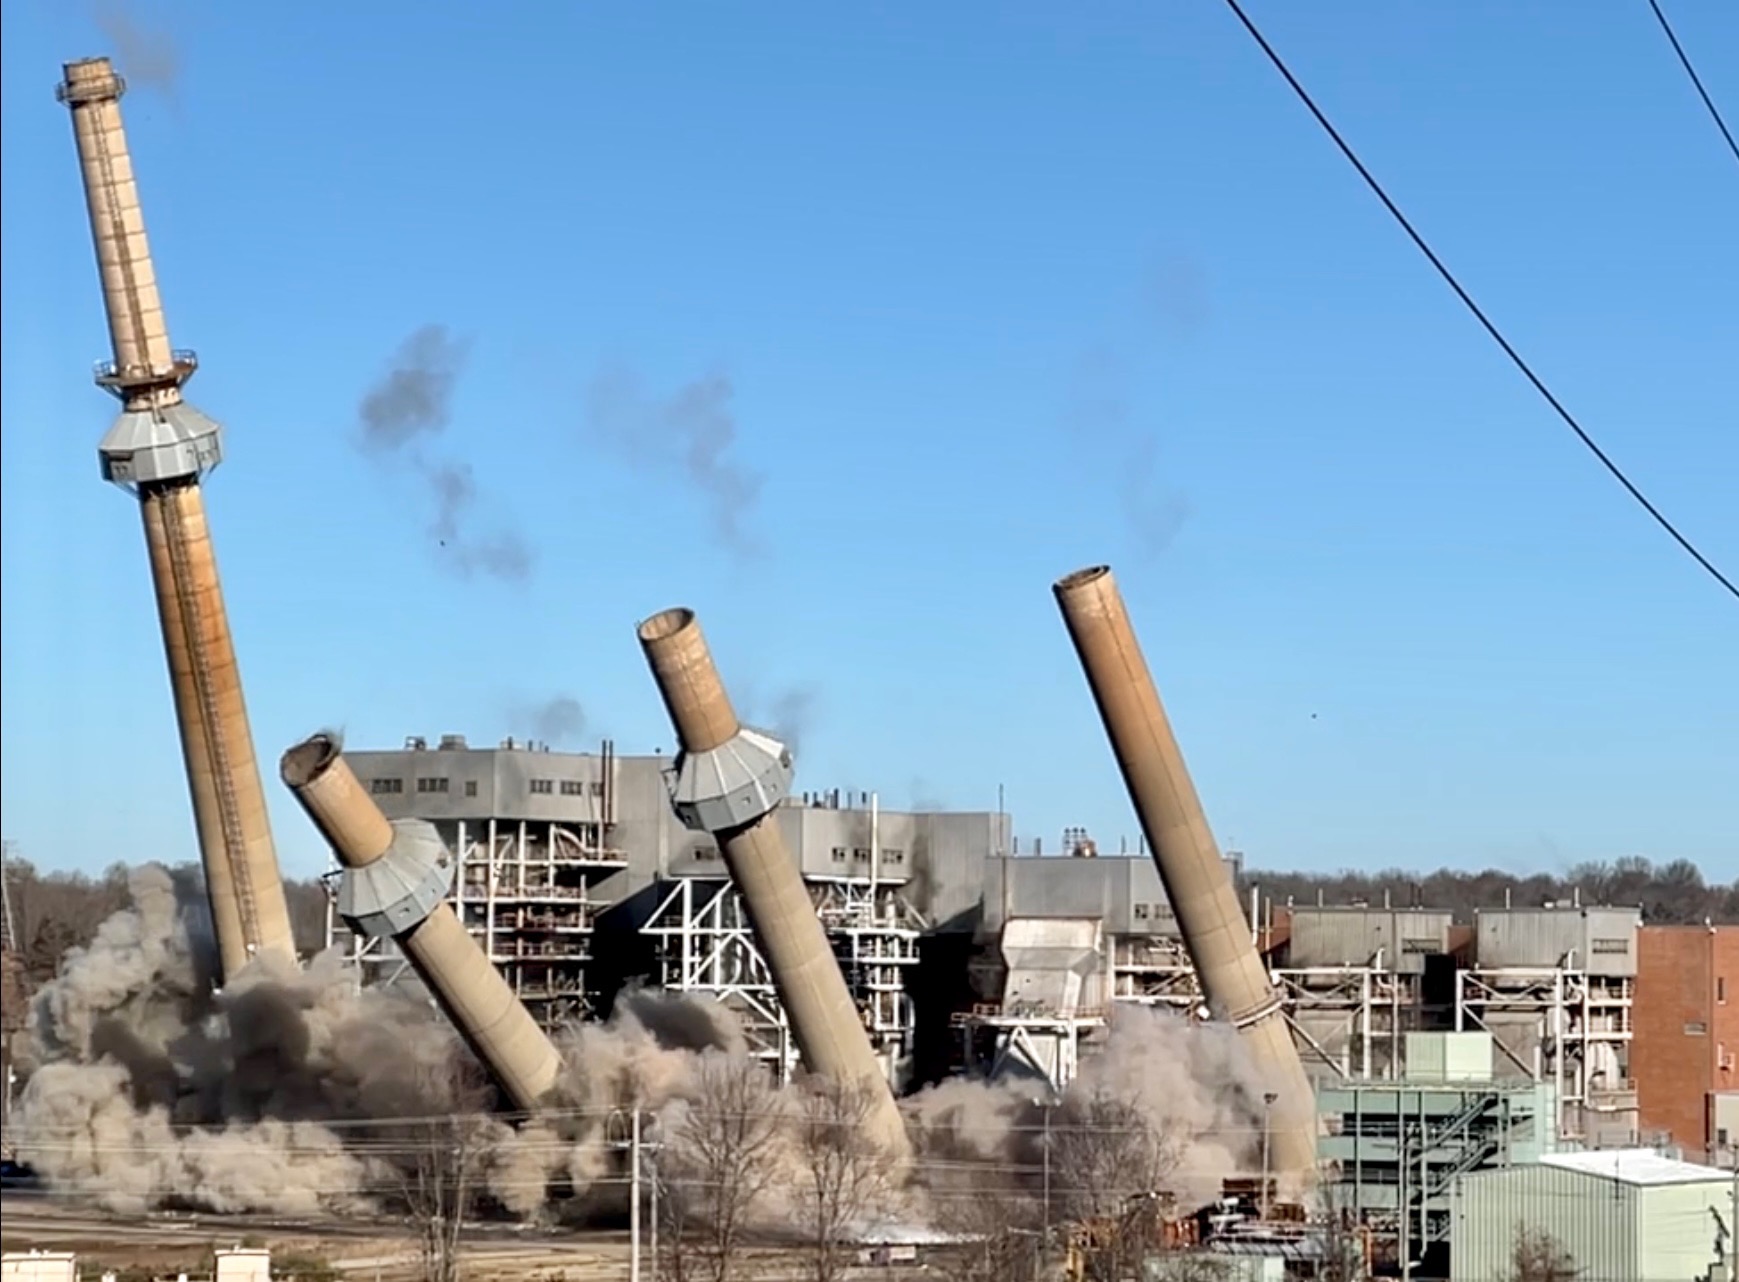 SLOW-MOTION VIDEO: James River power plant implodes in slo-mo